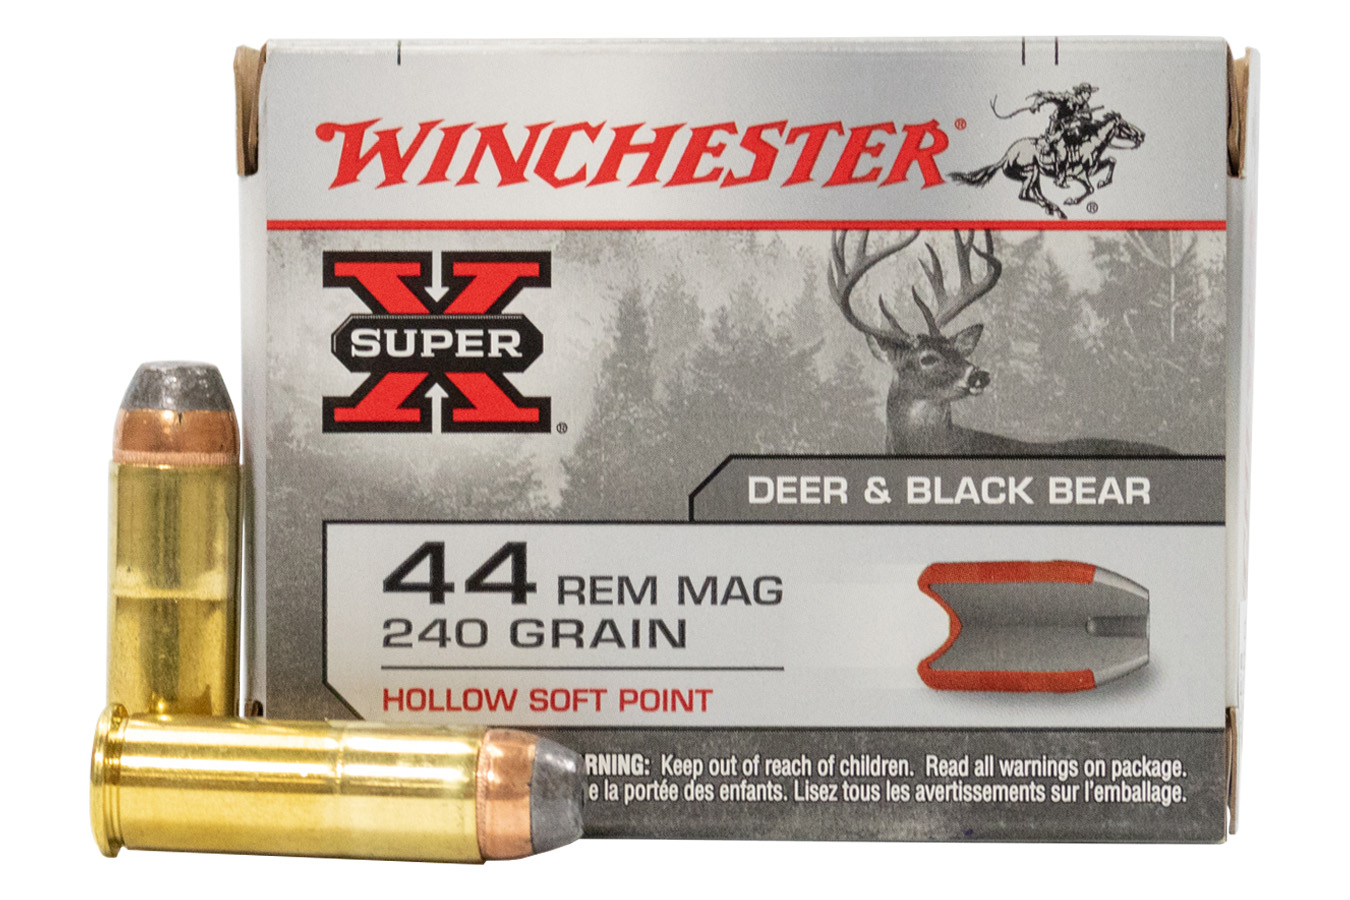 WINCHESTER AMMO 44 MAG 240 GR HOLLOW SOFT POINT SUPER-X